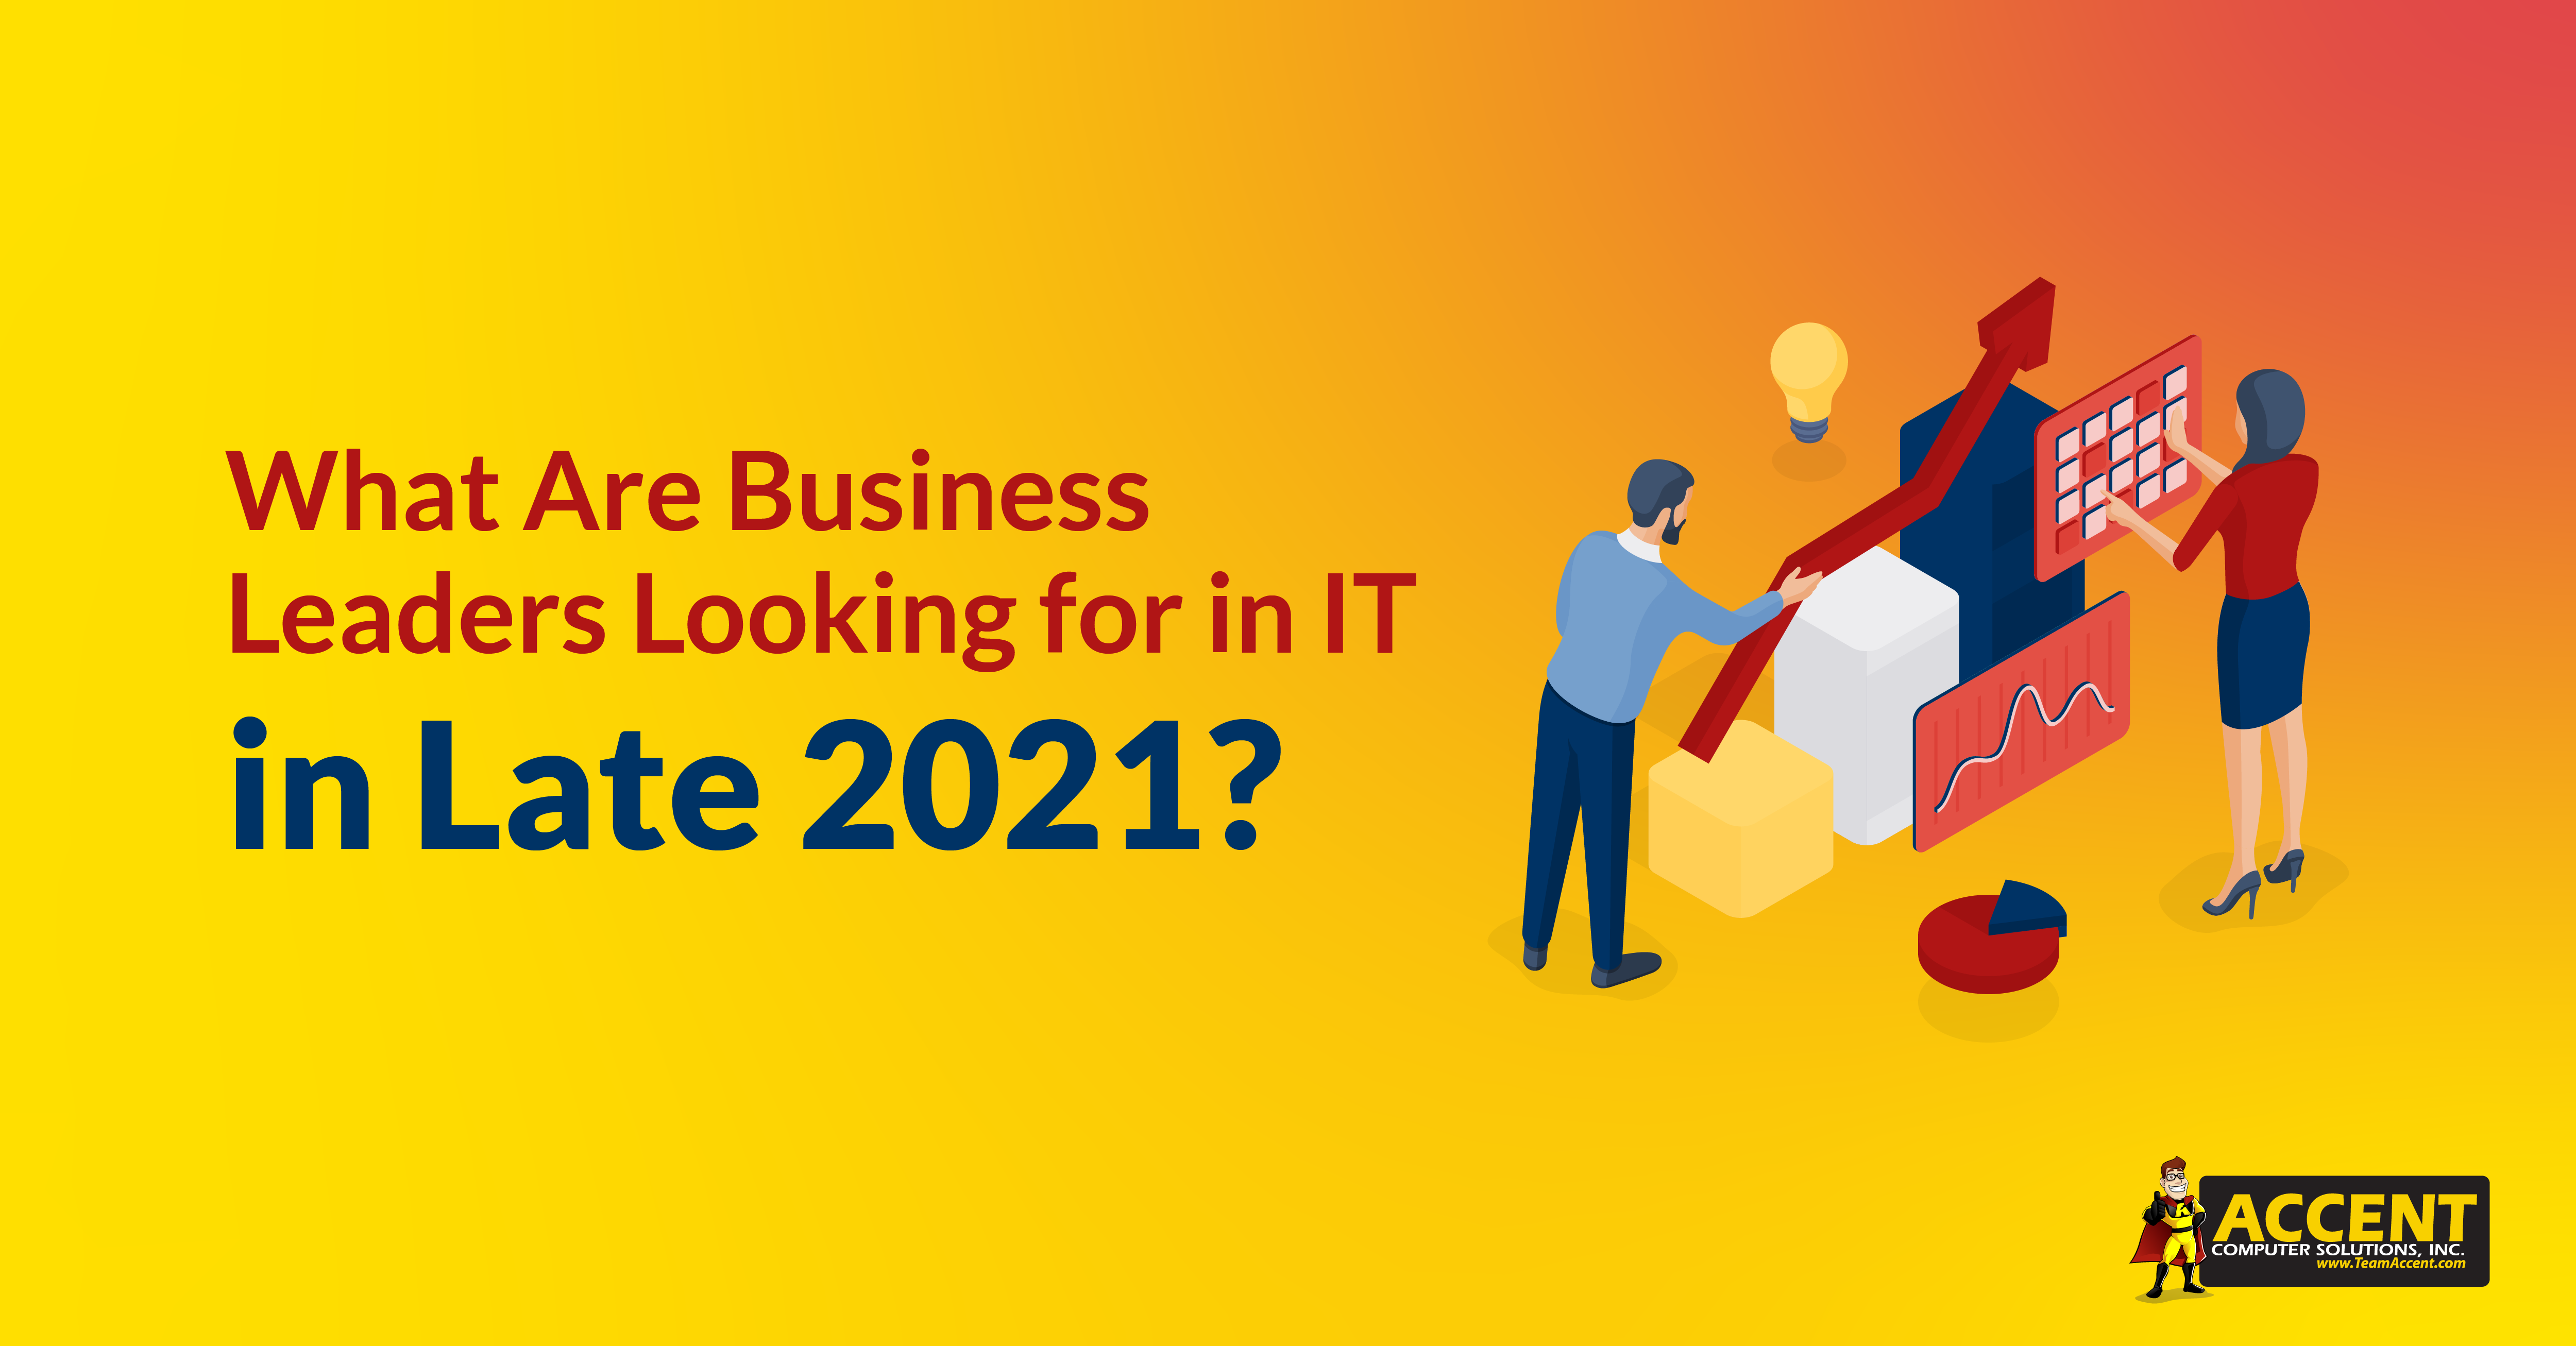 What Are Business Leaders Looking for in IT in Late 2021?